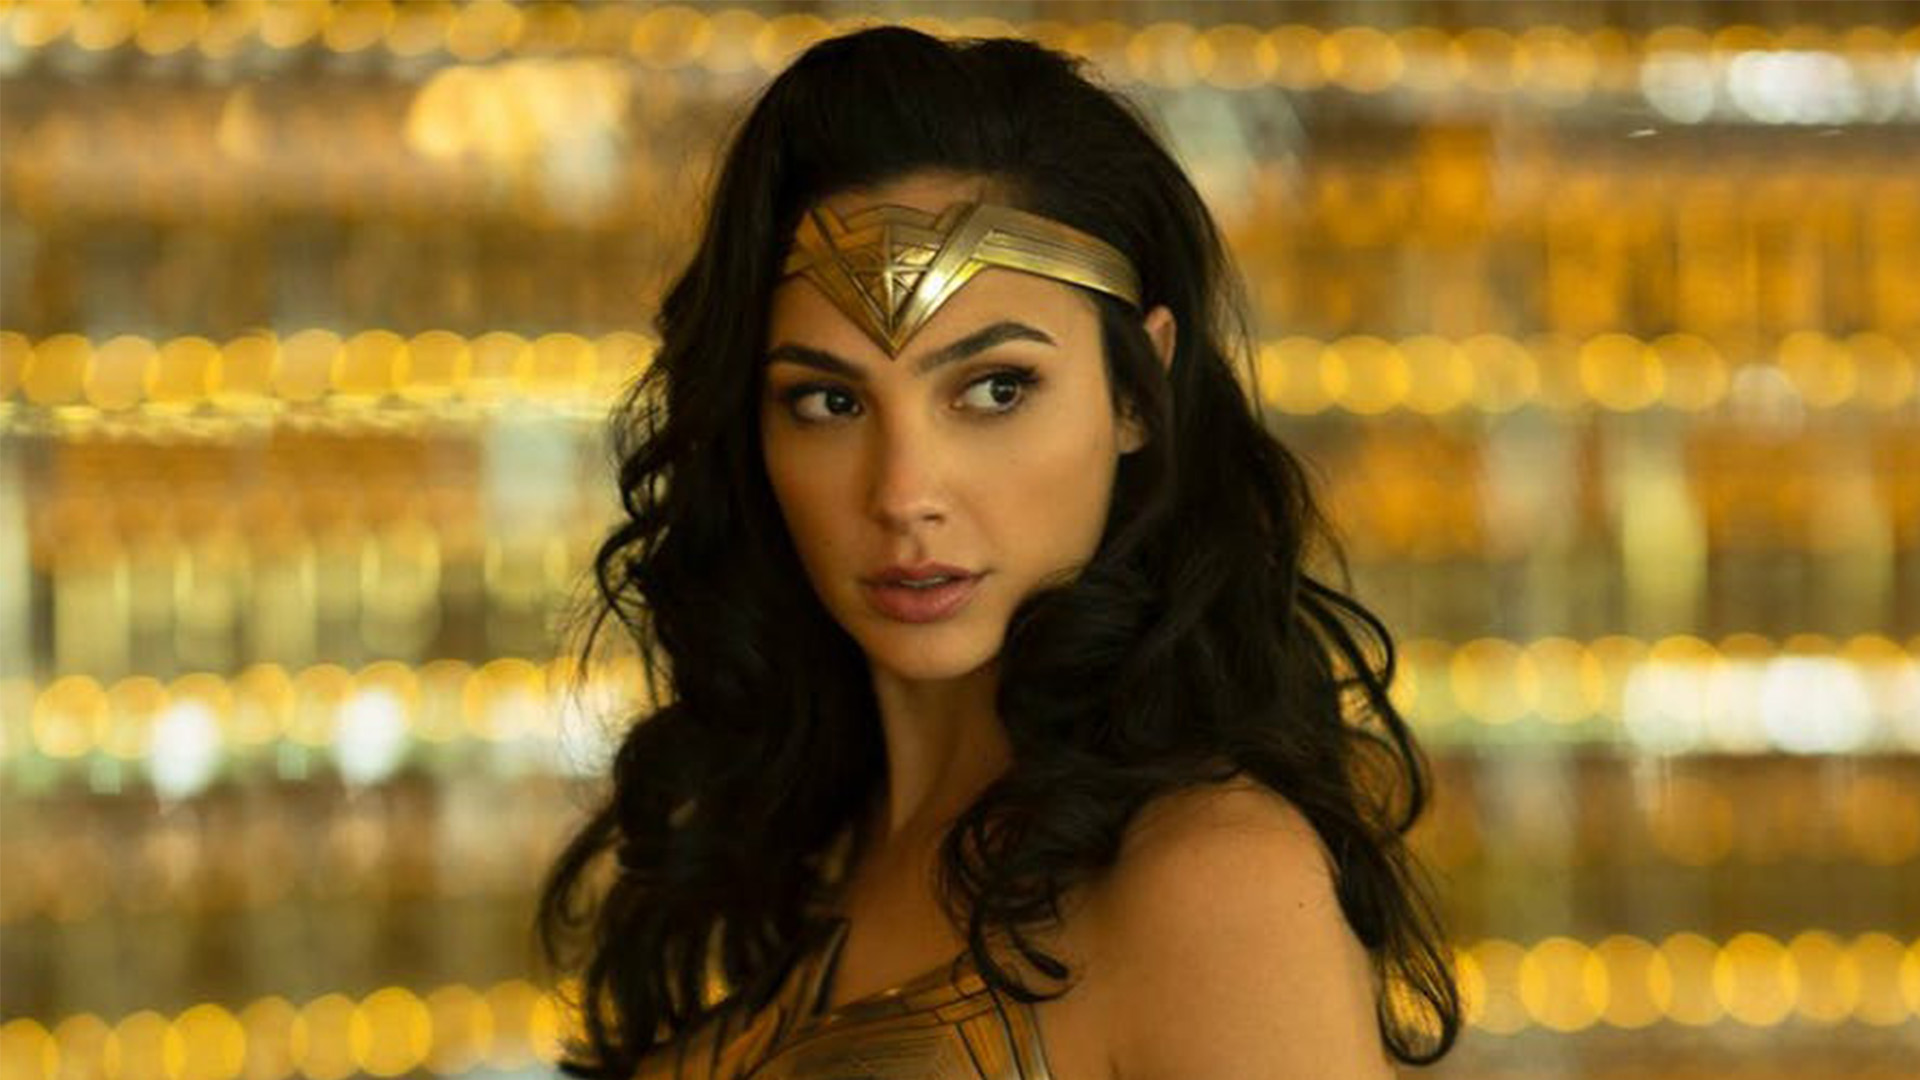 They showed Gal Gadot's Wonder Woman' 2 TV spot leaks DCEU cameo but fans are divided